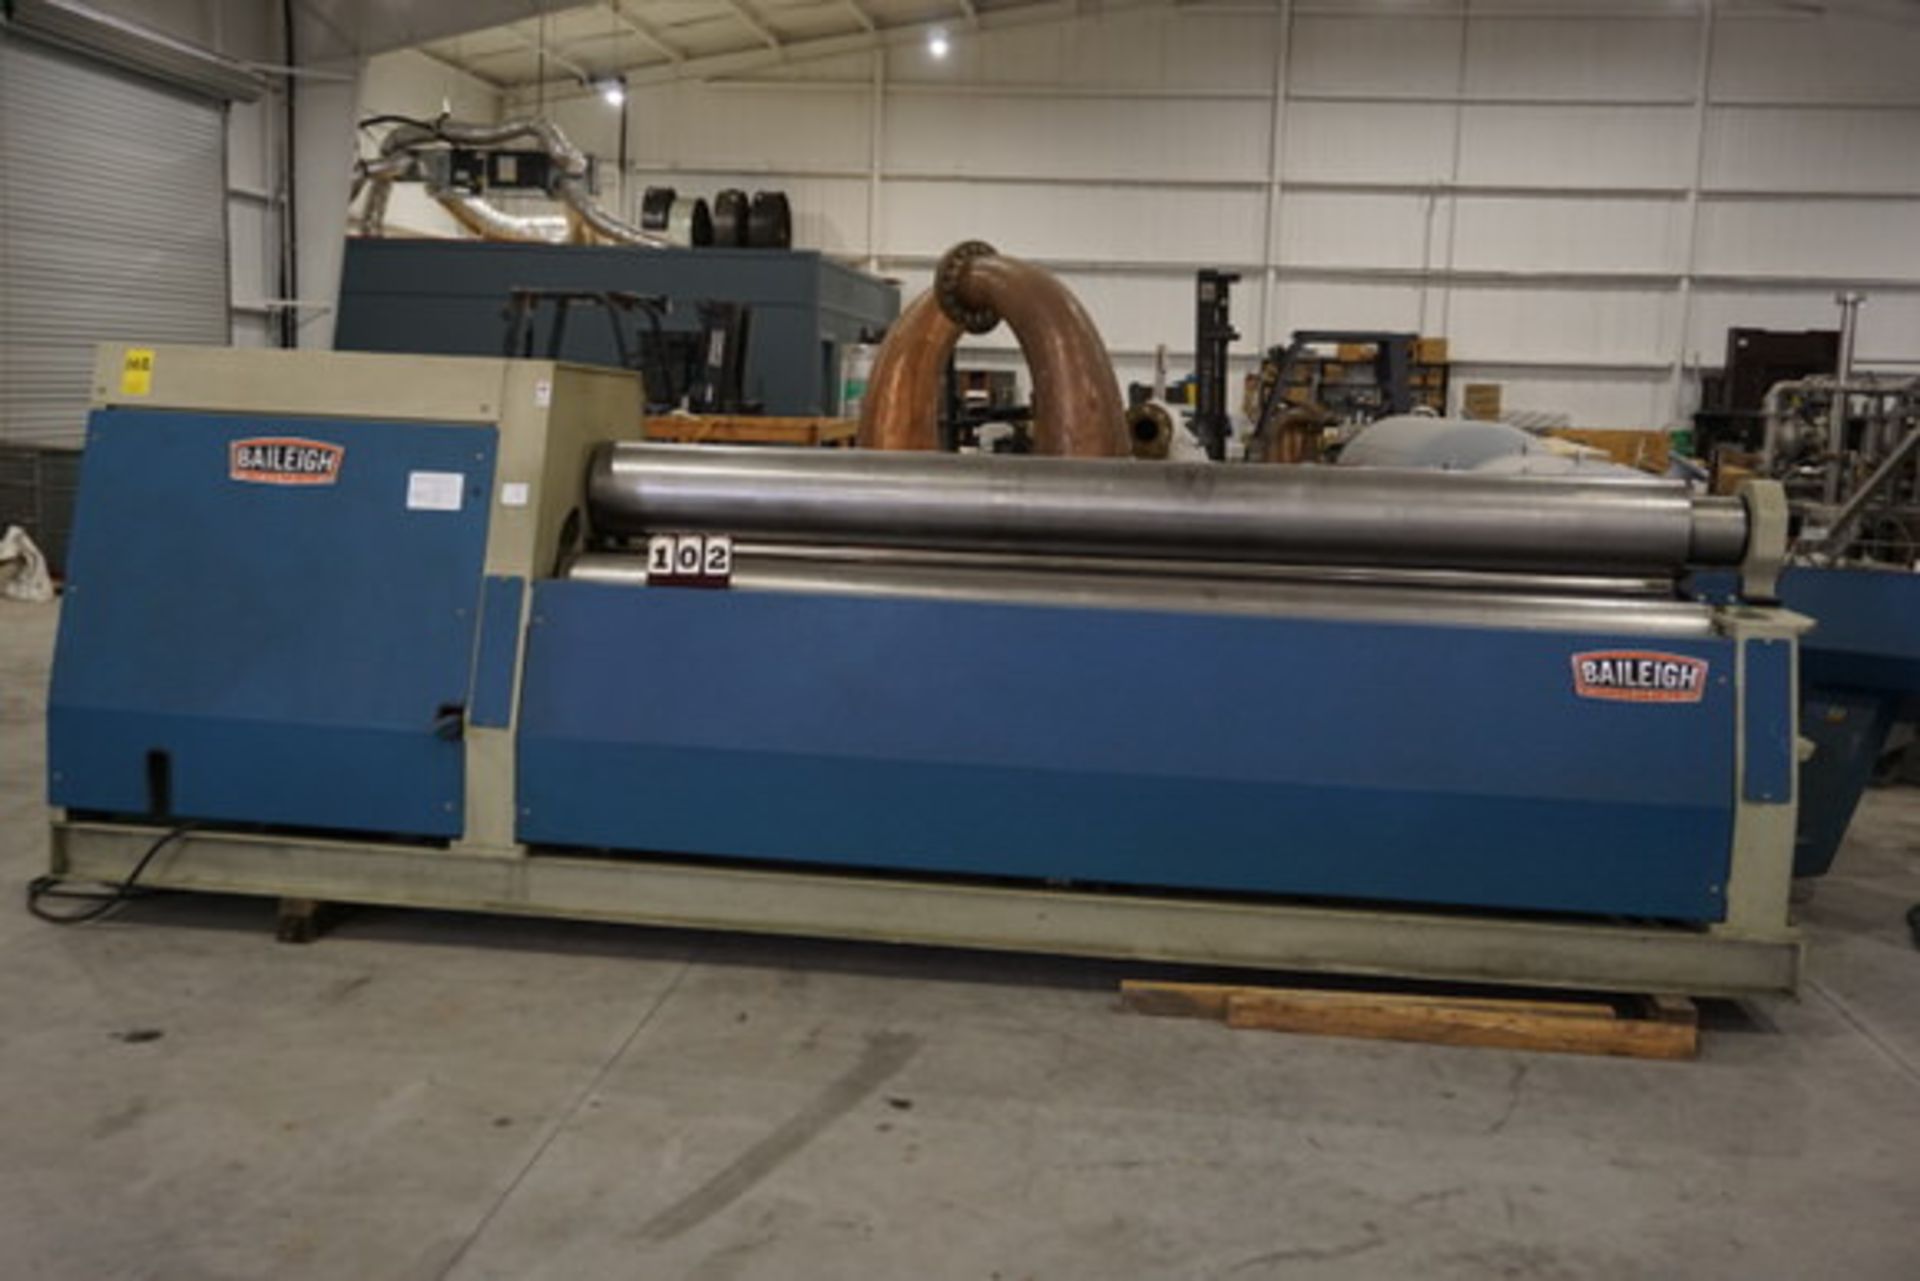 2014 Baileigh MH314C Four Roll Plate Roll, 480V, 1/2" x 10' Cap(LOCATION: ROME, TX) - Image 26 of 26